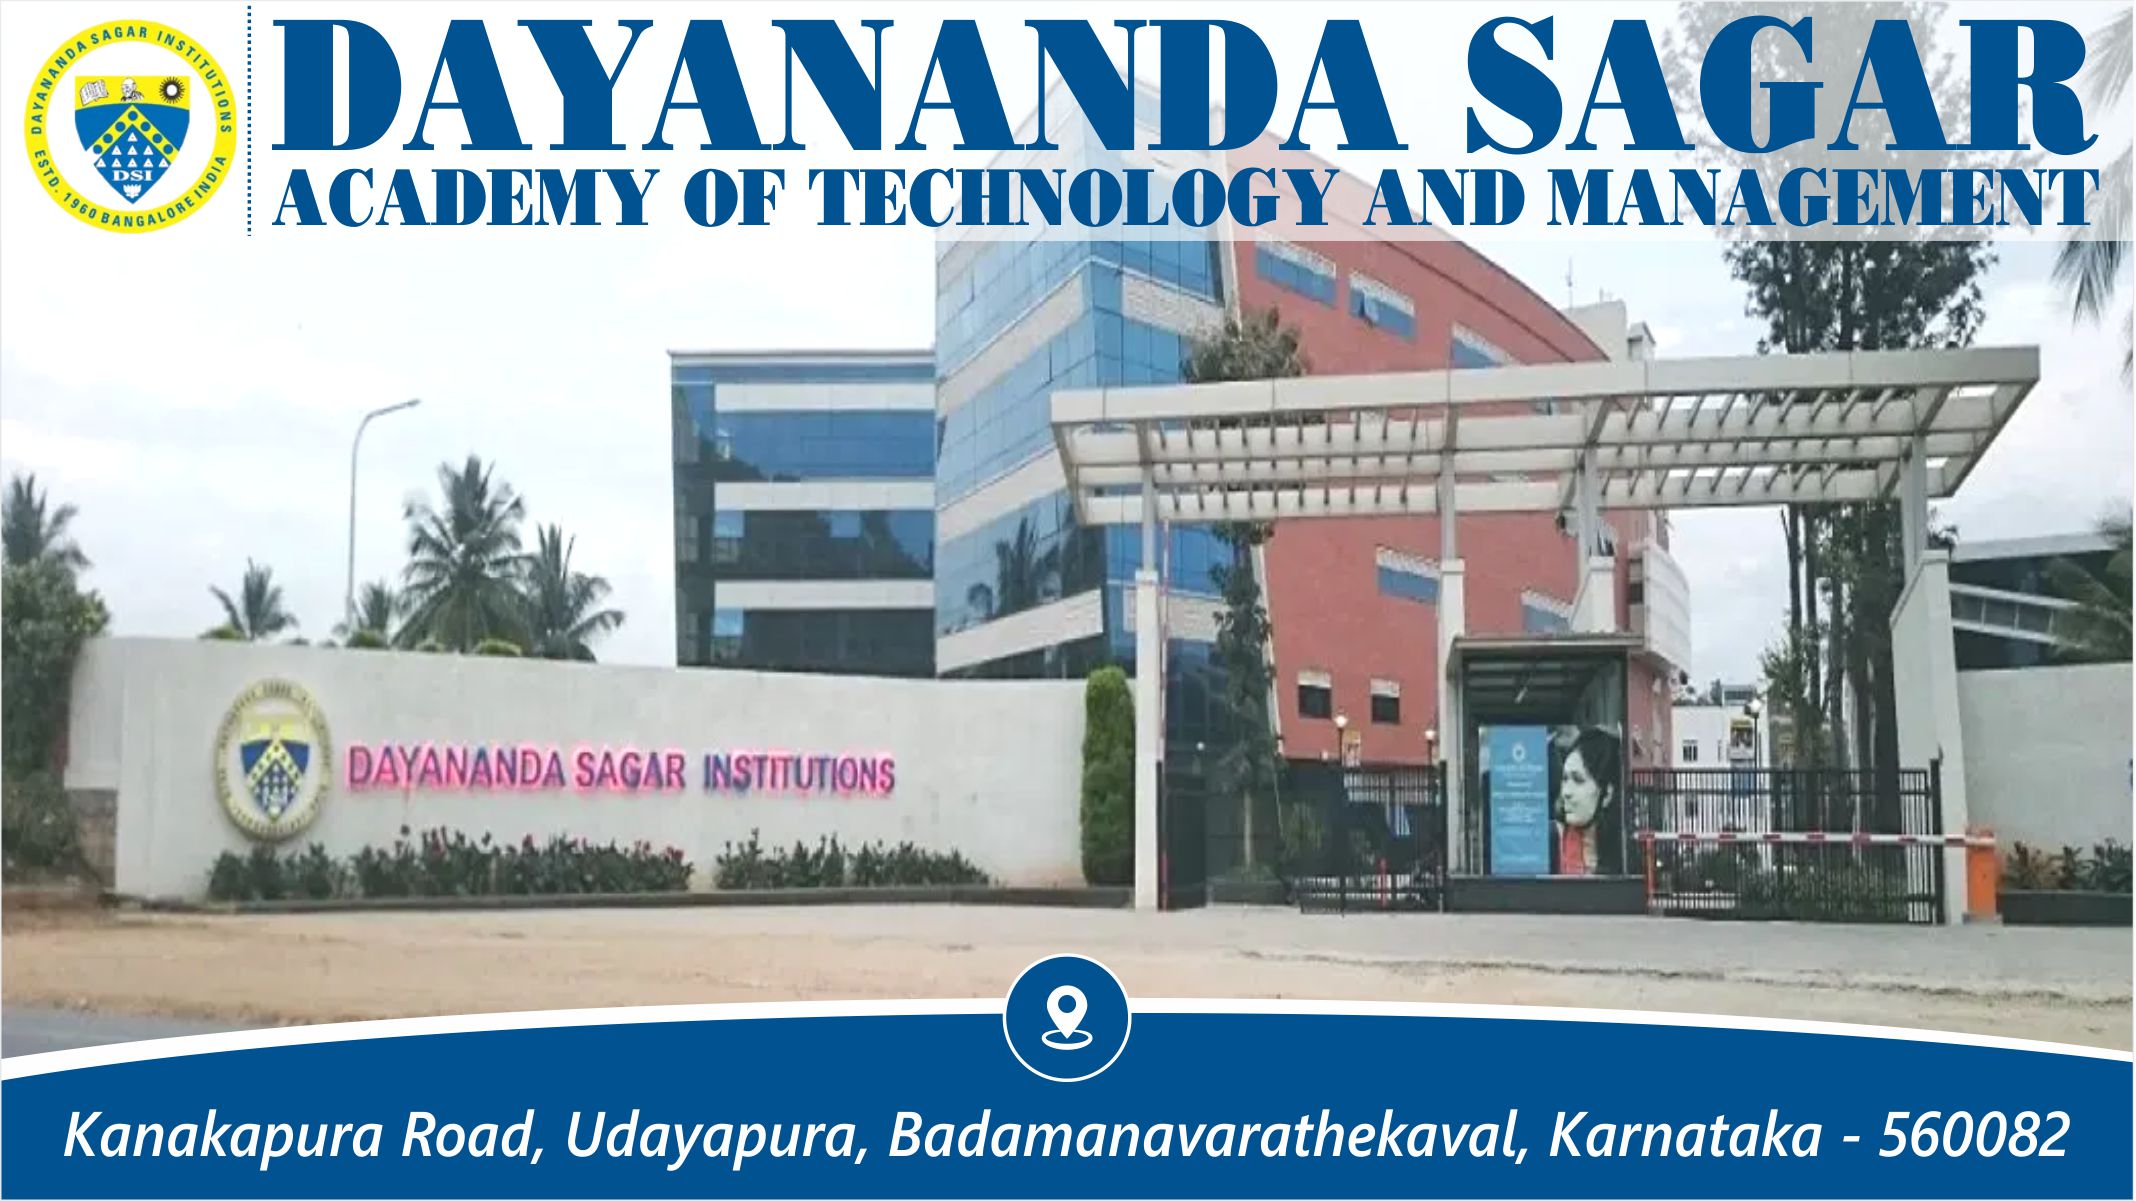 Out Side View of Dayananda Sagar Academy of Technology and Management